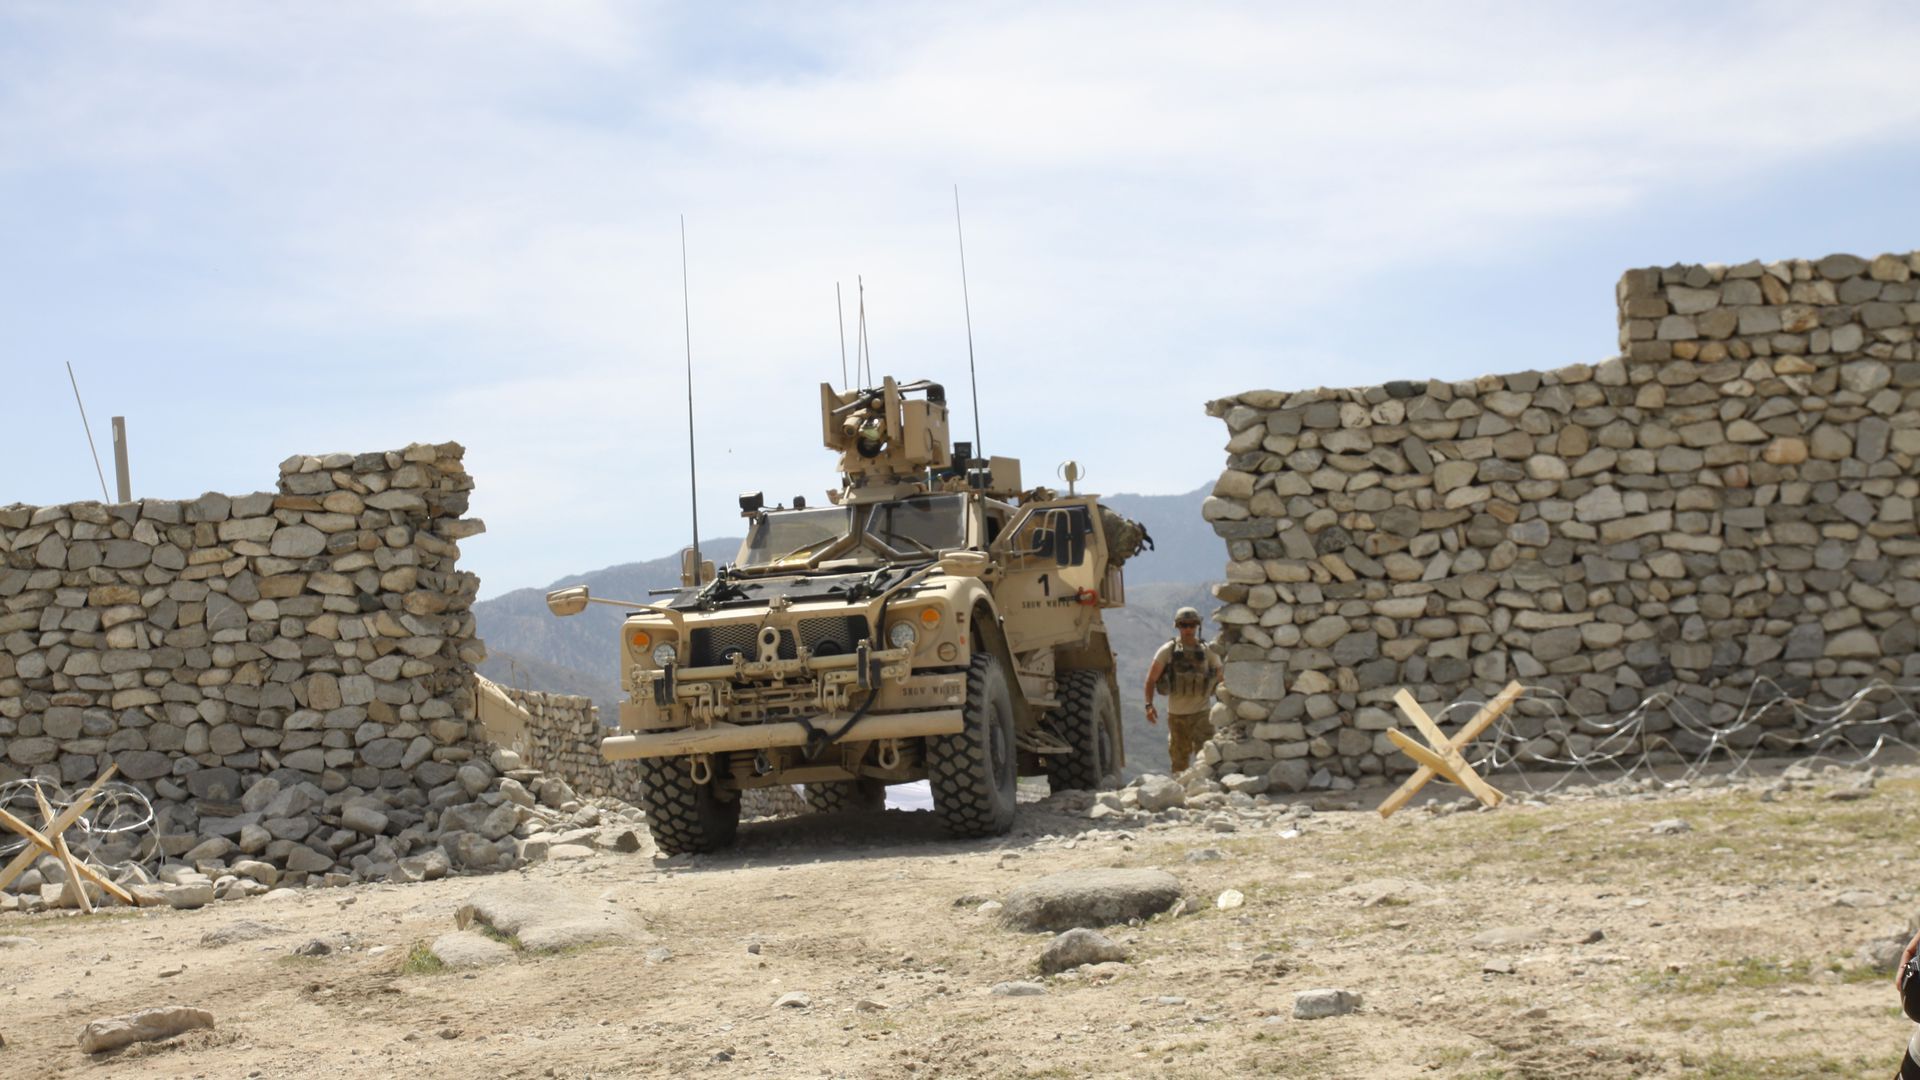 armored vehicle in Afghanistan